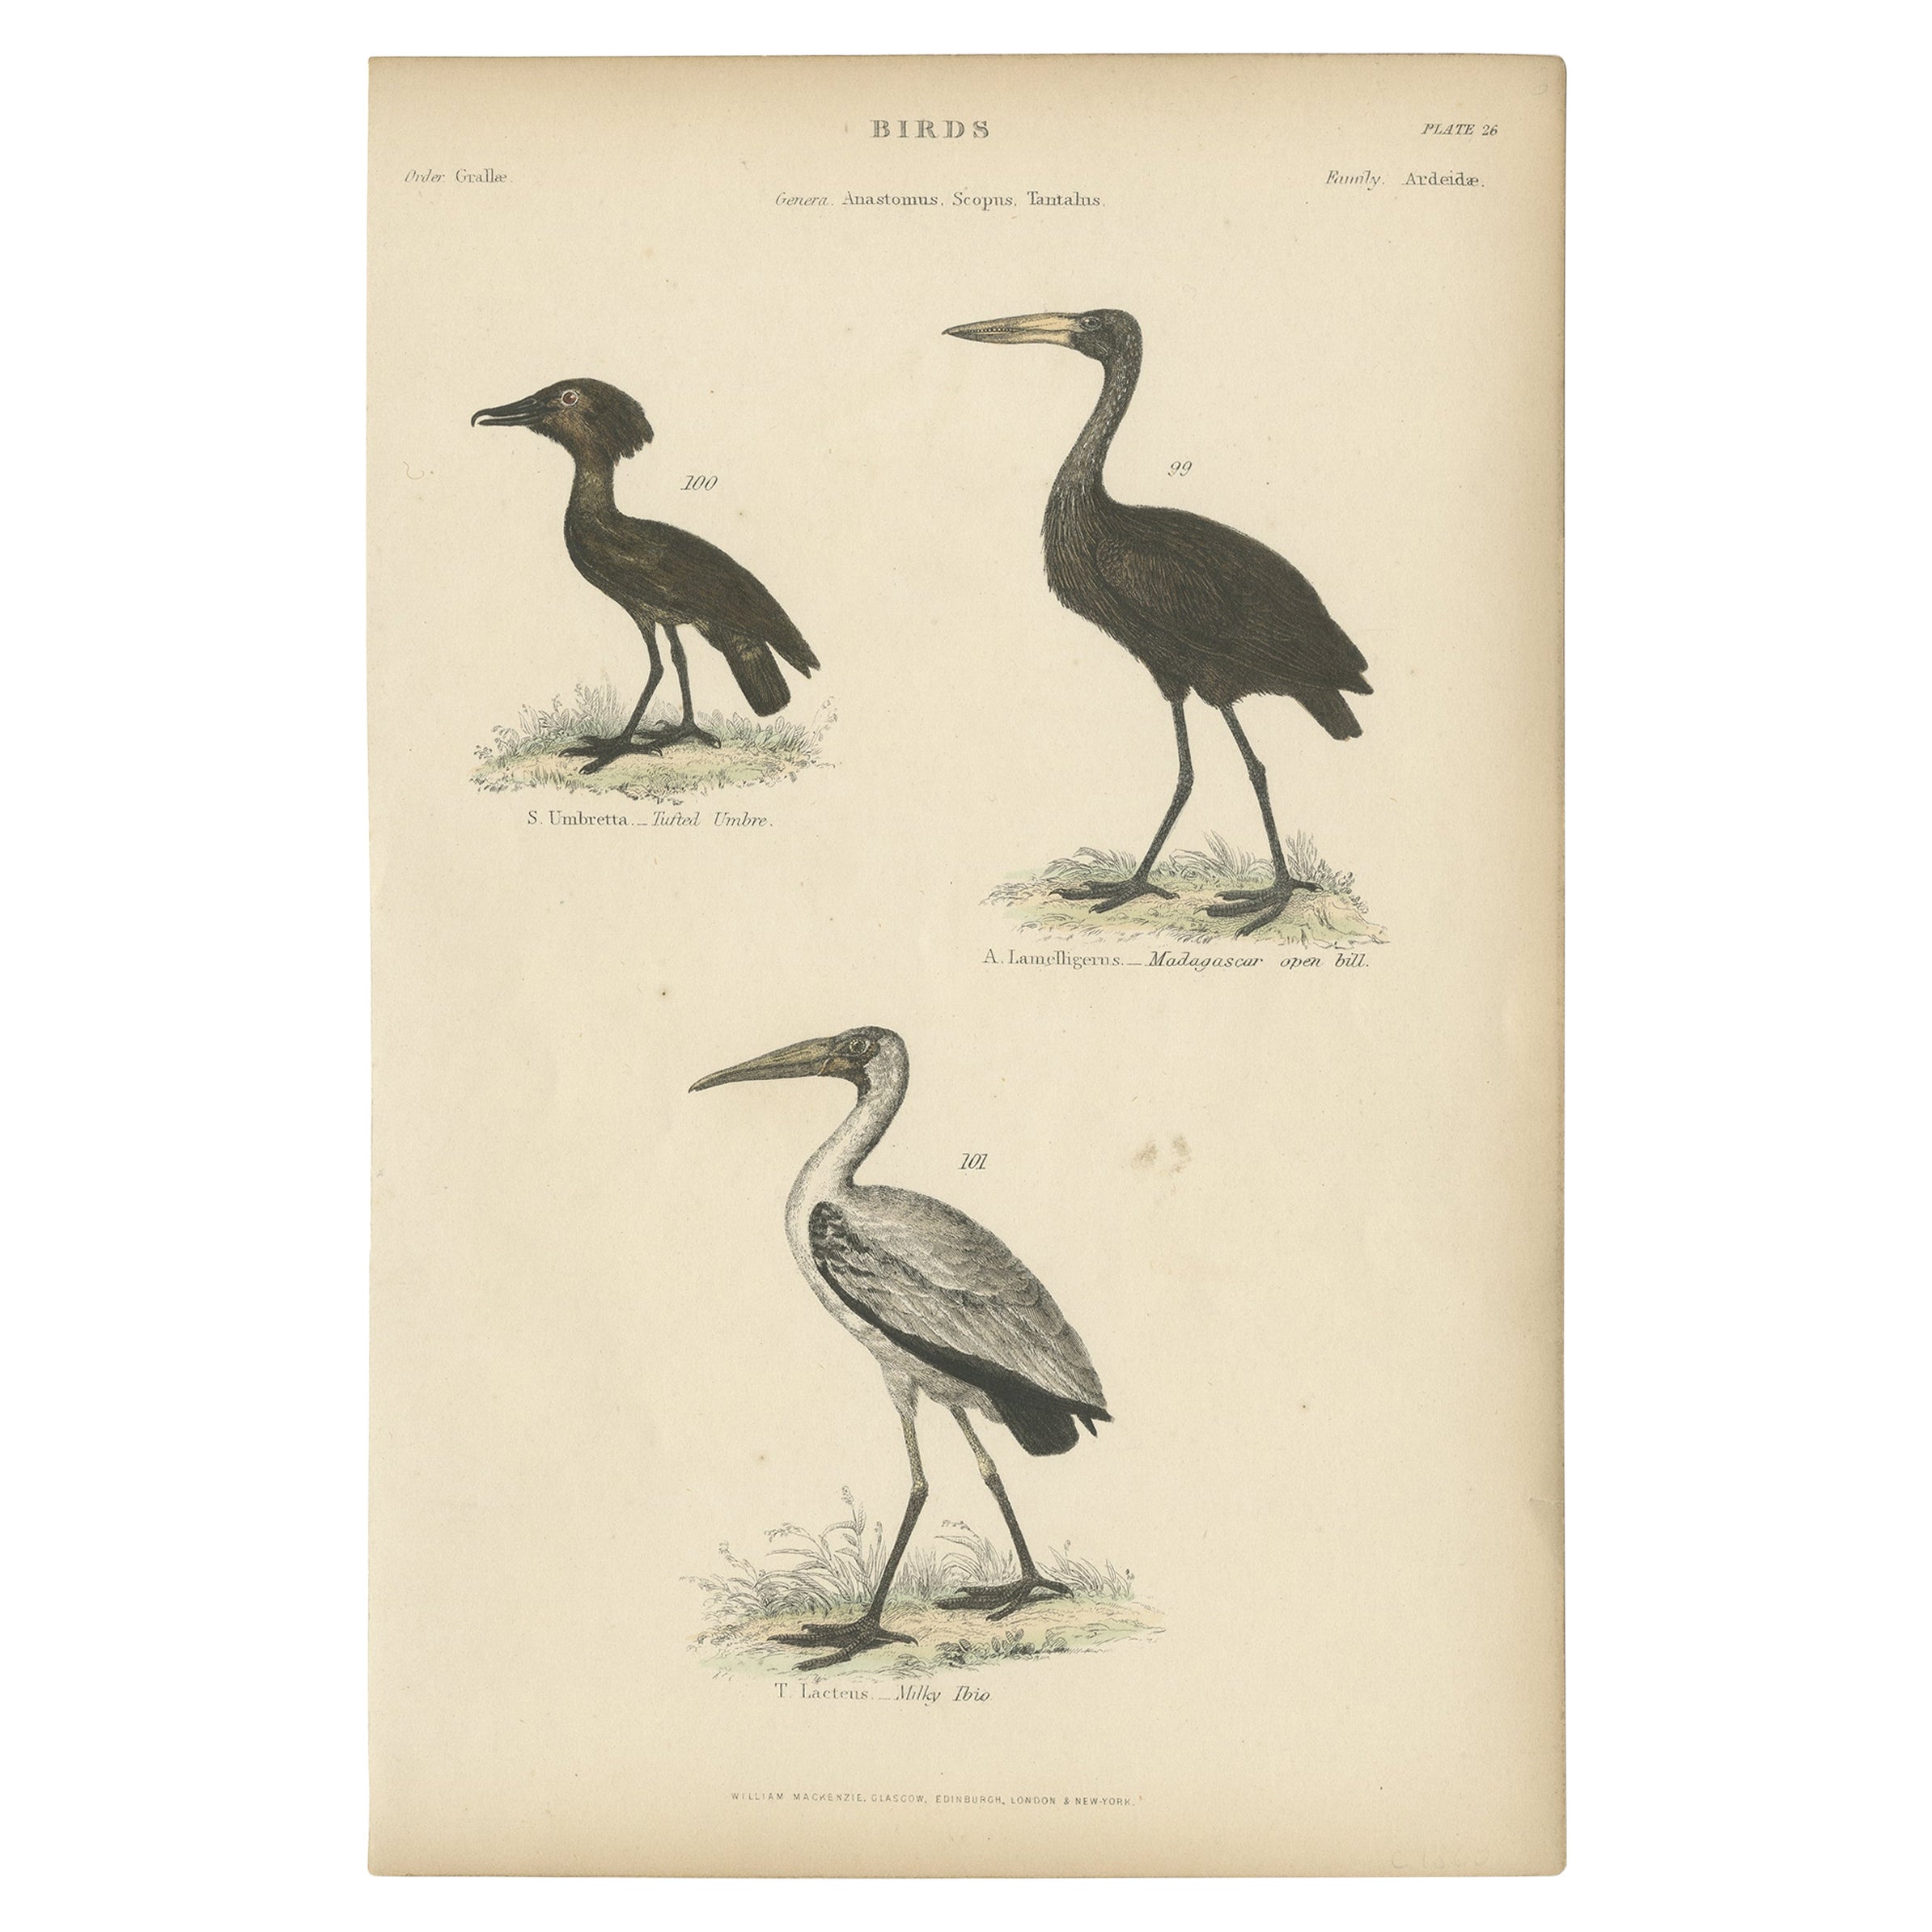 Old Bird Print of The Tufted Umbre, Madagascar Open Bill and Milky Ibis, c.1860 For Sale